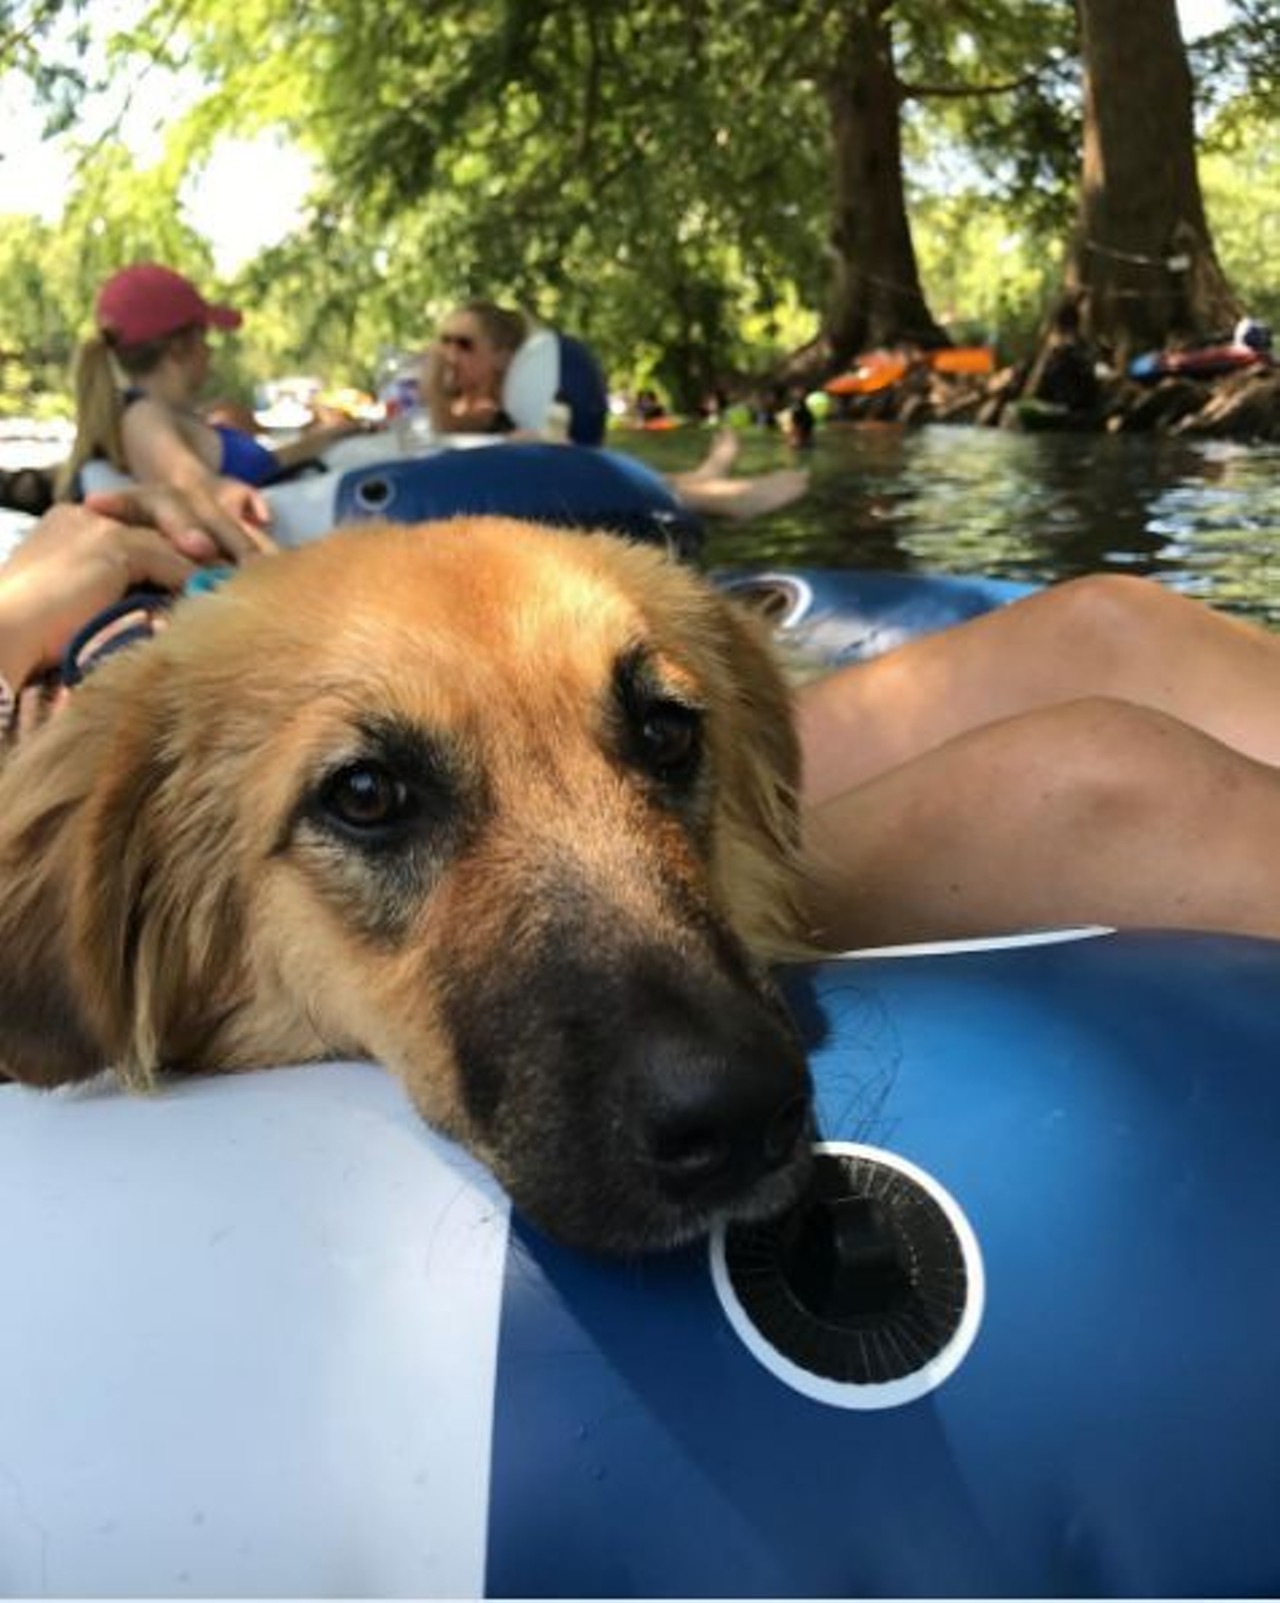 San Marcos River
221 Sessom Drive, San Marcos, (512) 393-5930
At the San Marcos River, we can all float on okay (and for free). 
Photo via Instagram, a_pup_named_indy_